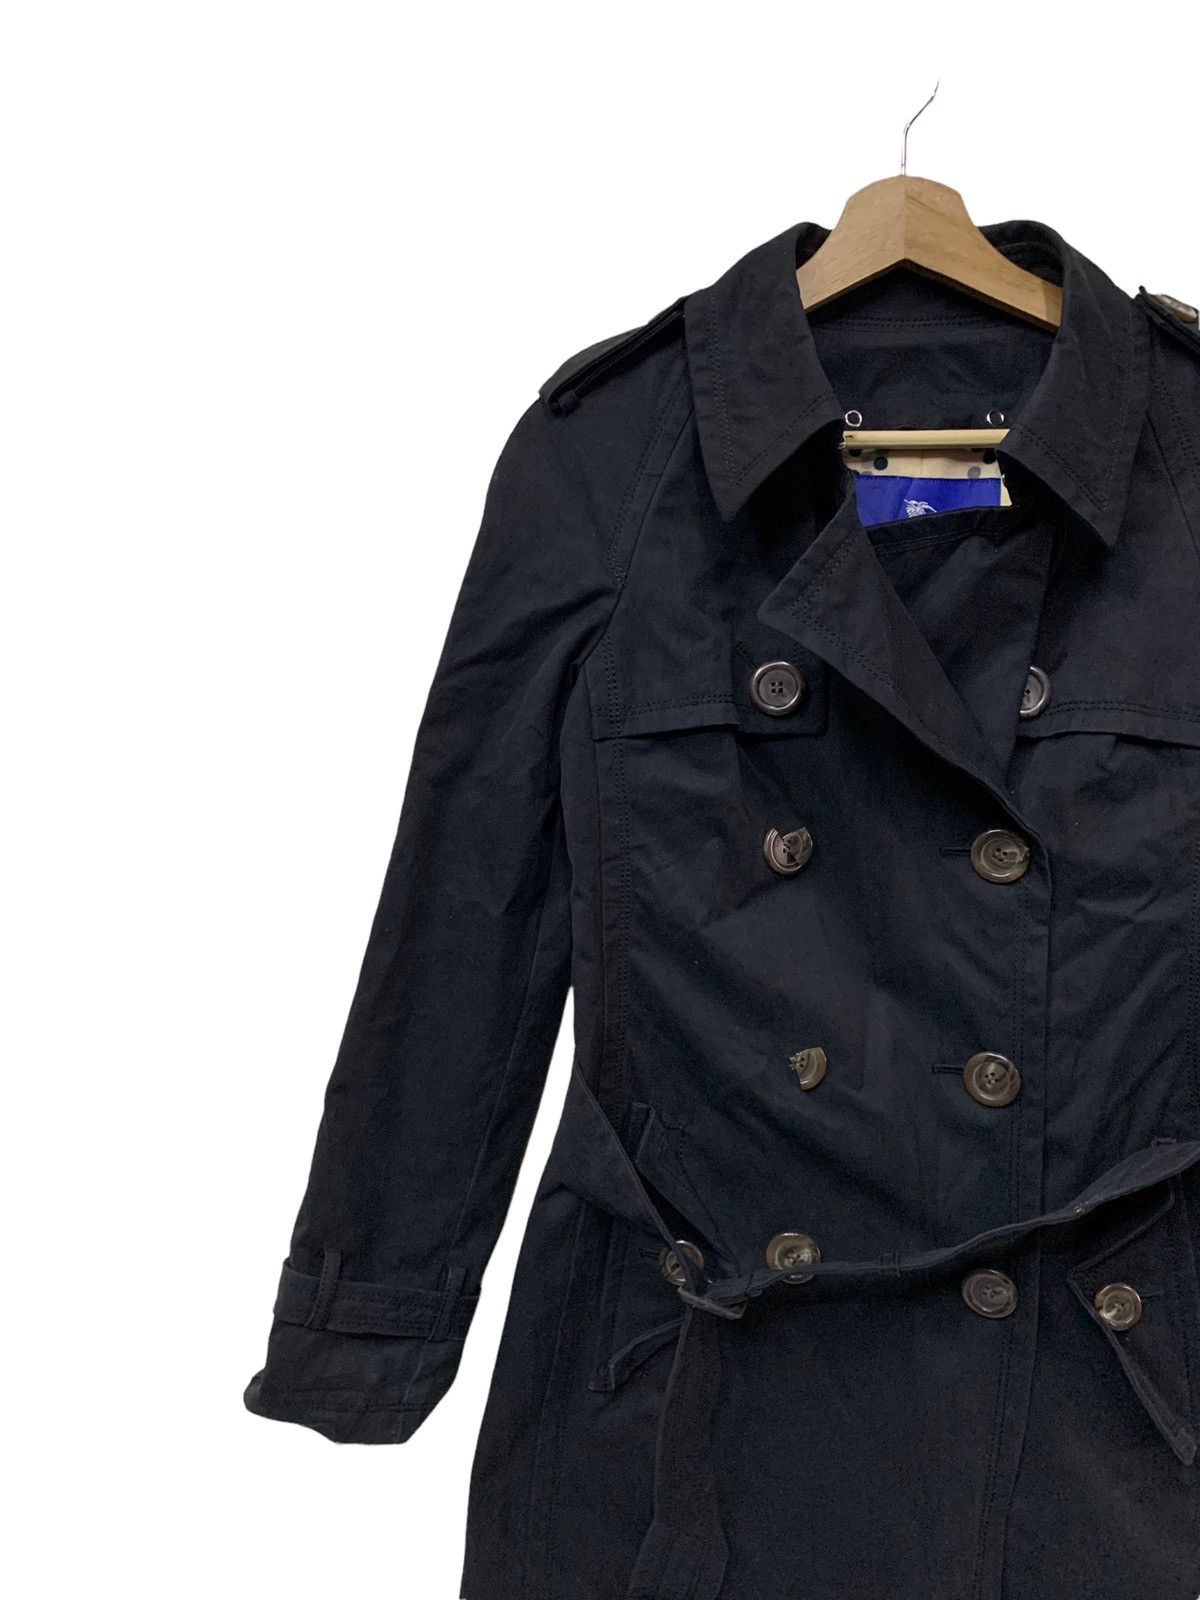 🔥BURBERRY BLUE LABEL WOOL CHERRY LINED TRENCH COAT - 6